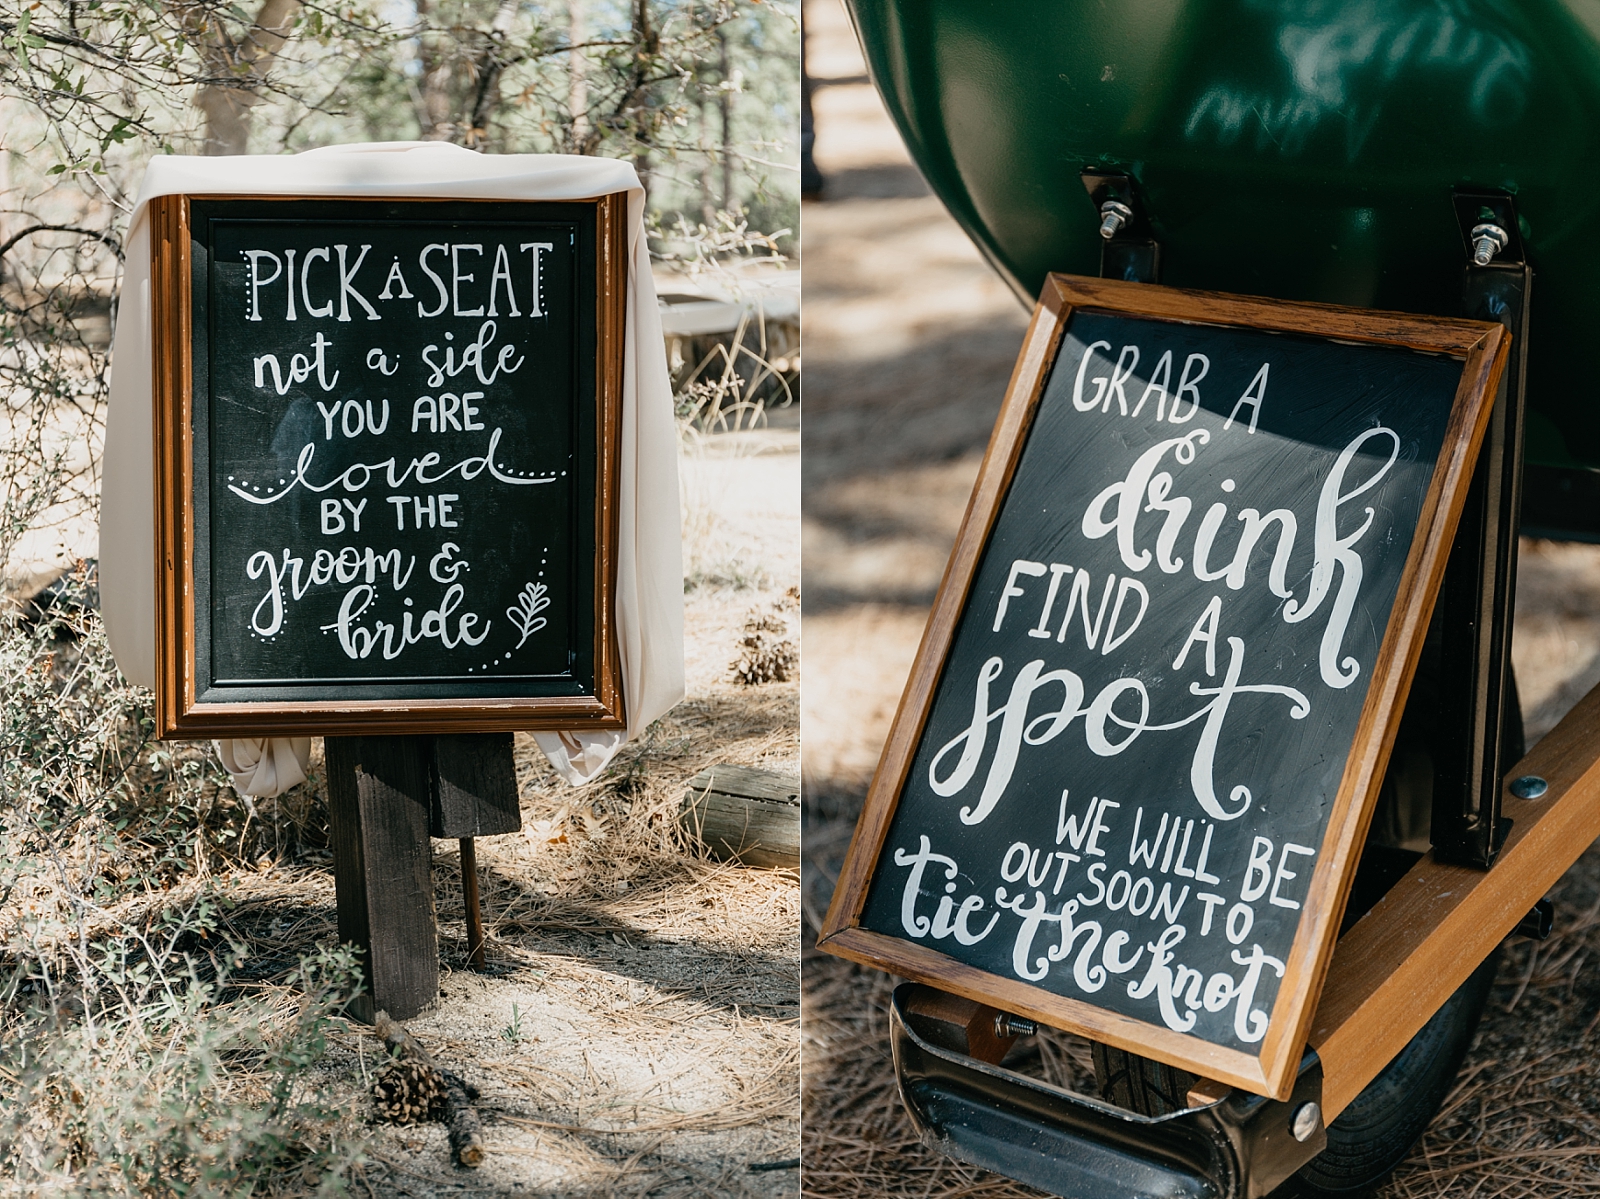 Ceremony detail signs pick a seat not a side you are loved by the groom and bride, grab a drink find a spot we will be out soon to tie the knot Groom Creek Schoolhouse Wedding Photos Prescott, Arizona Samantha Patri Photography